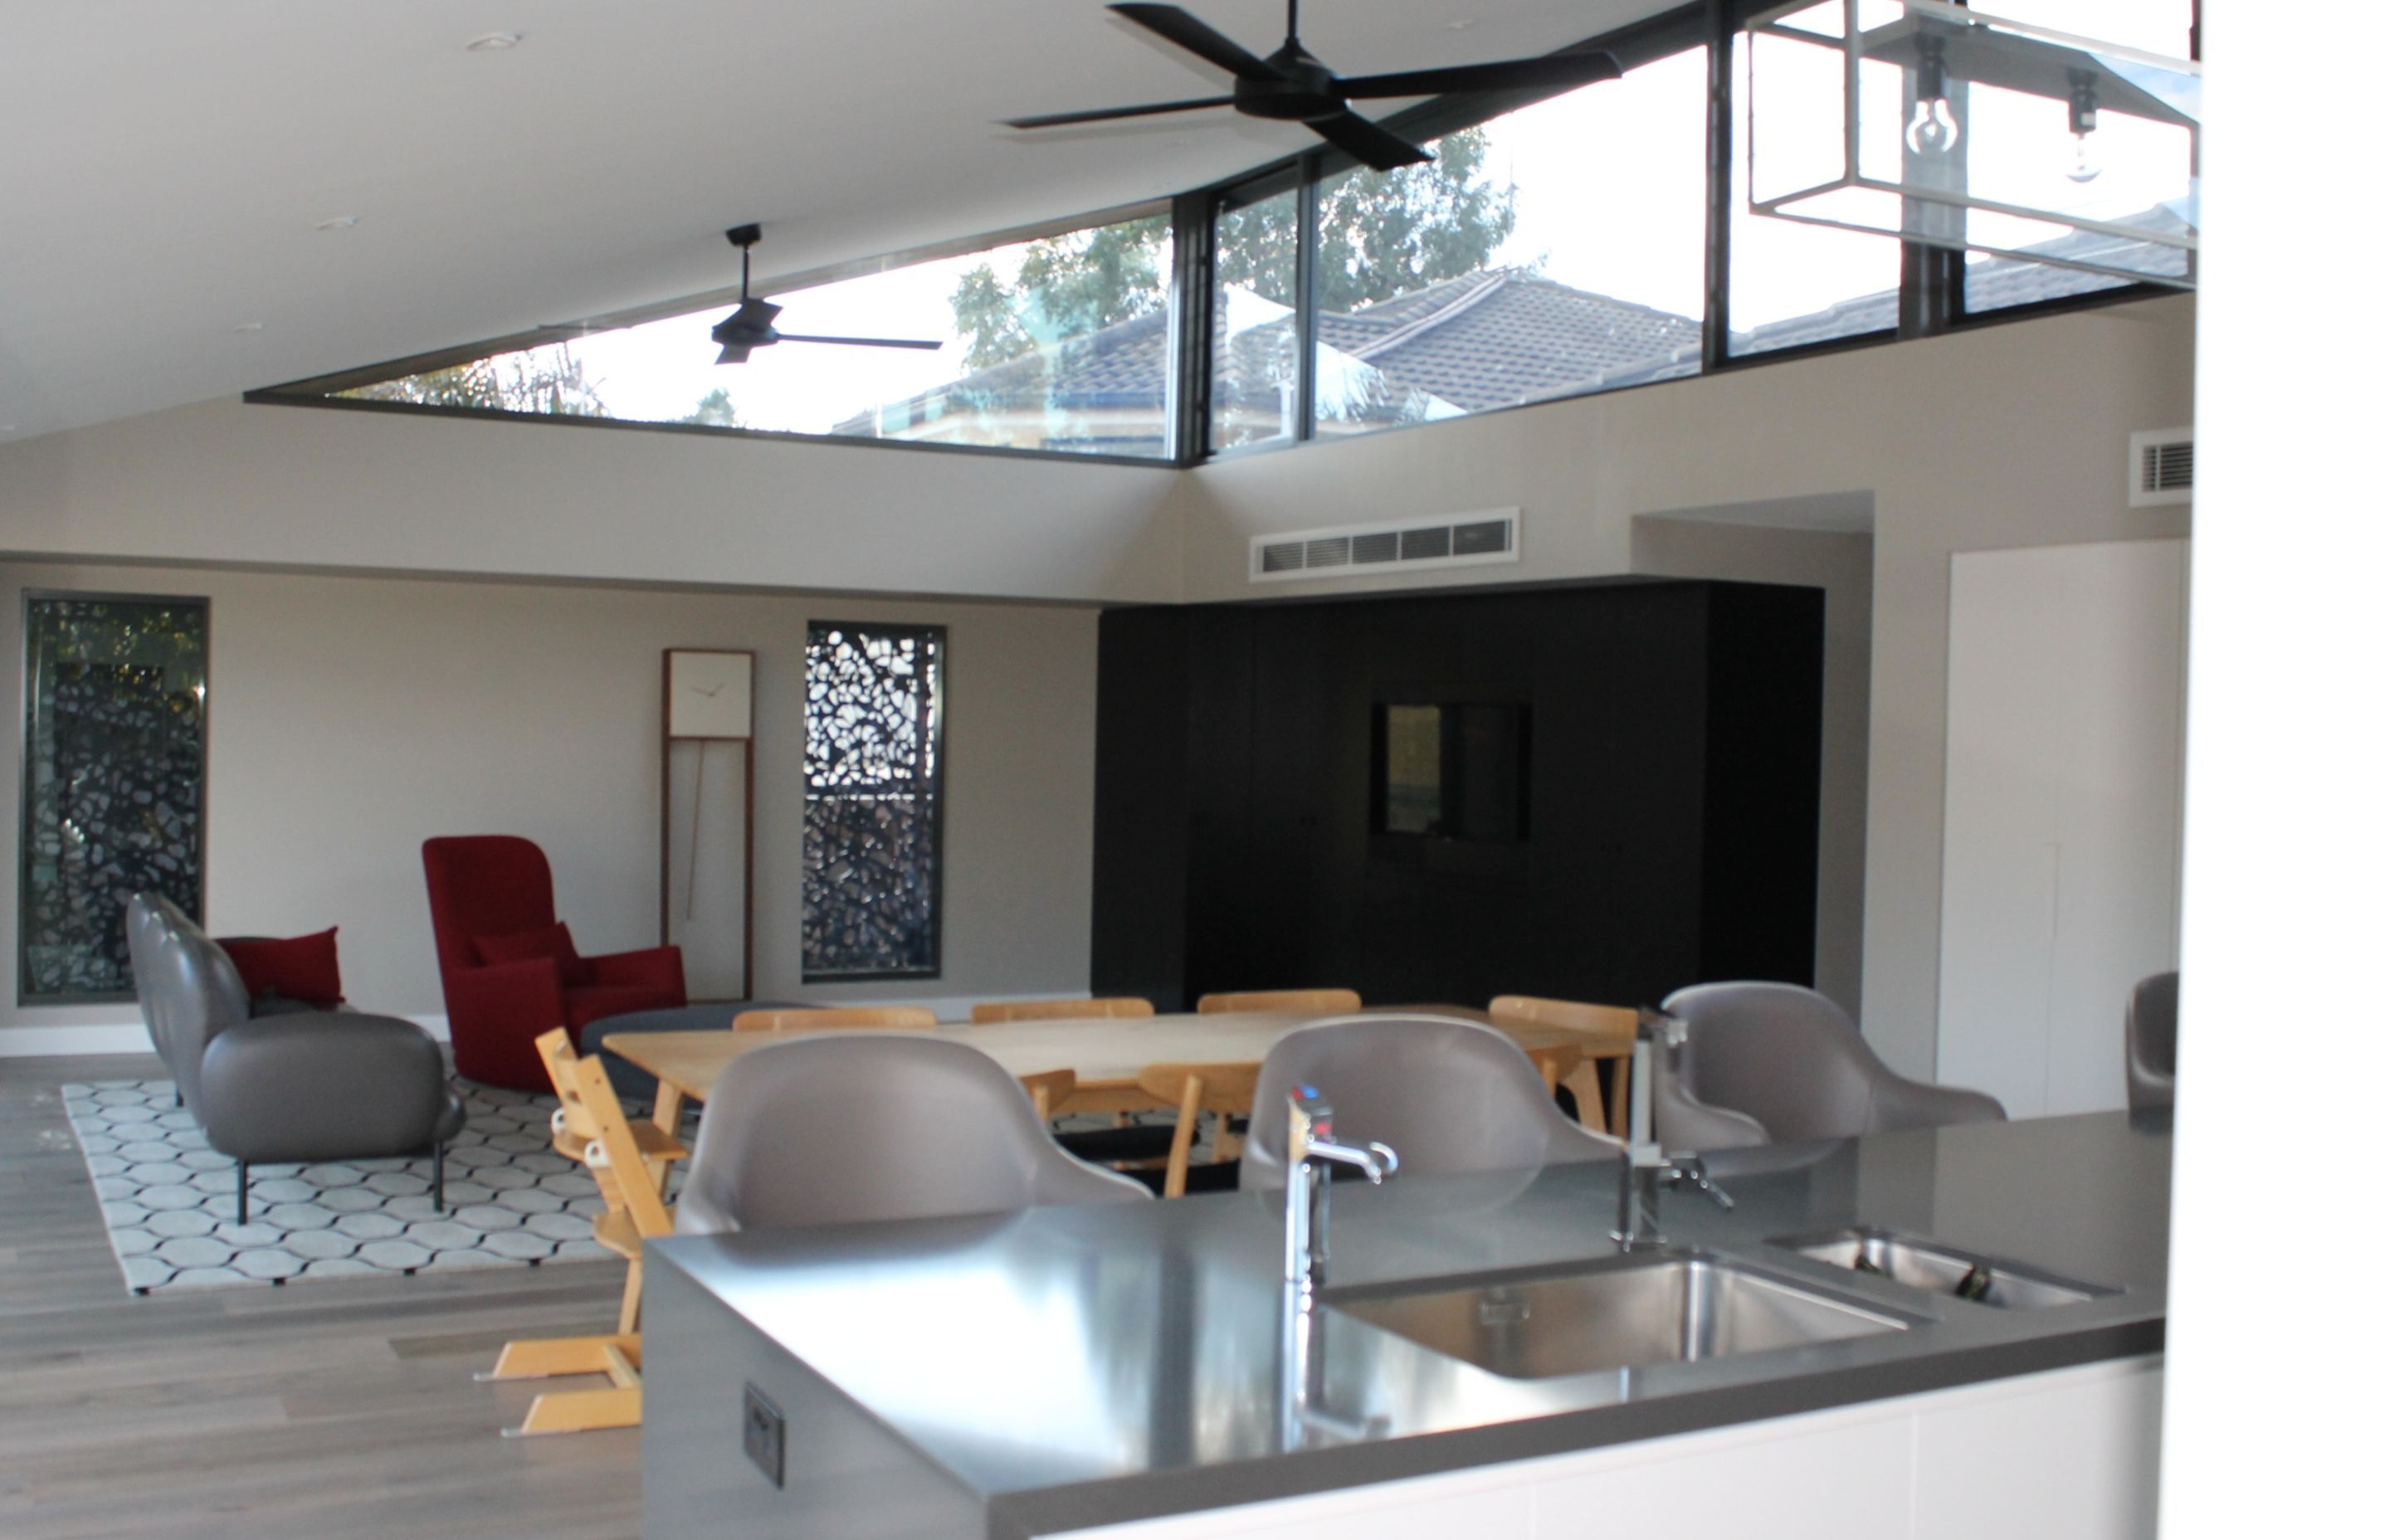 Kitchen, dining and living areas with high level glazing